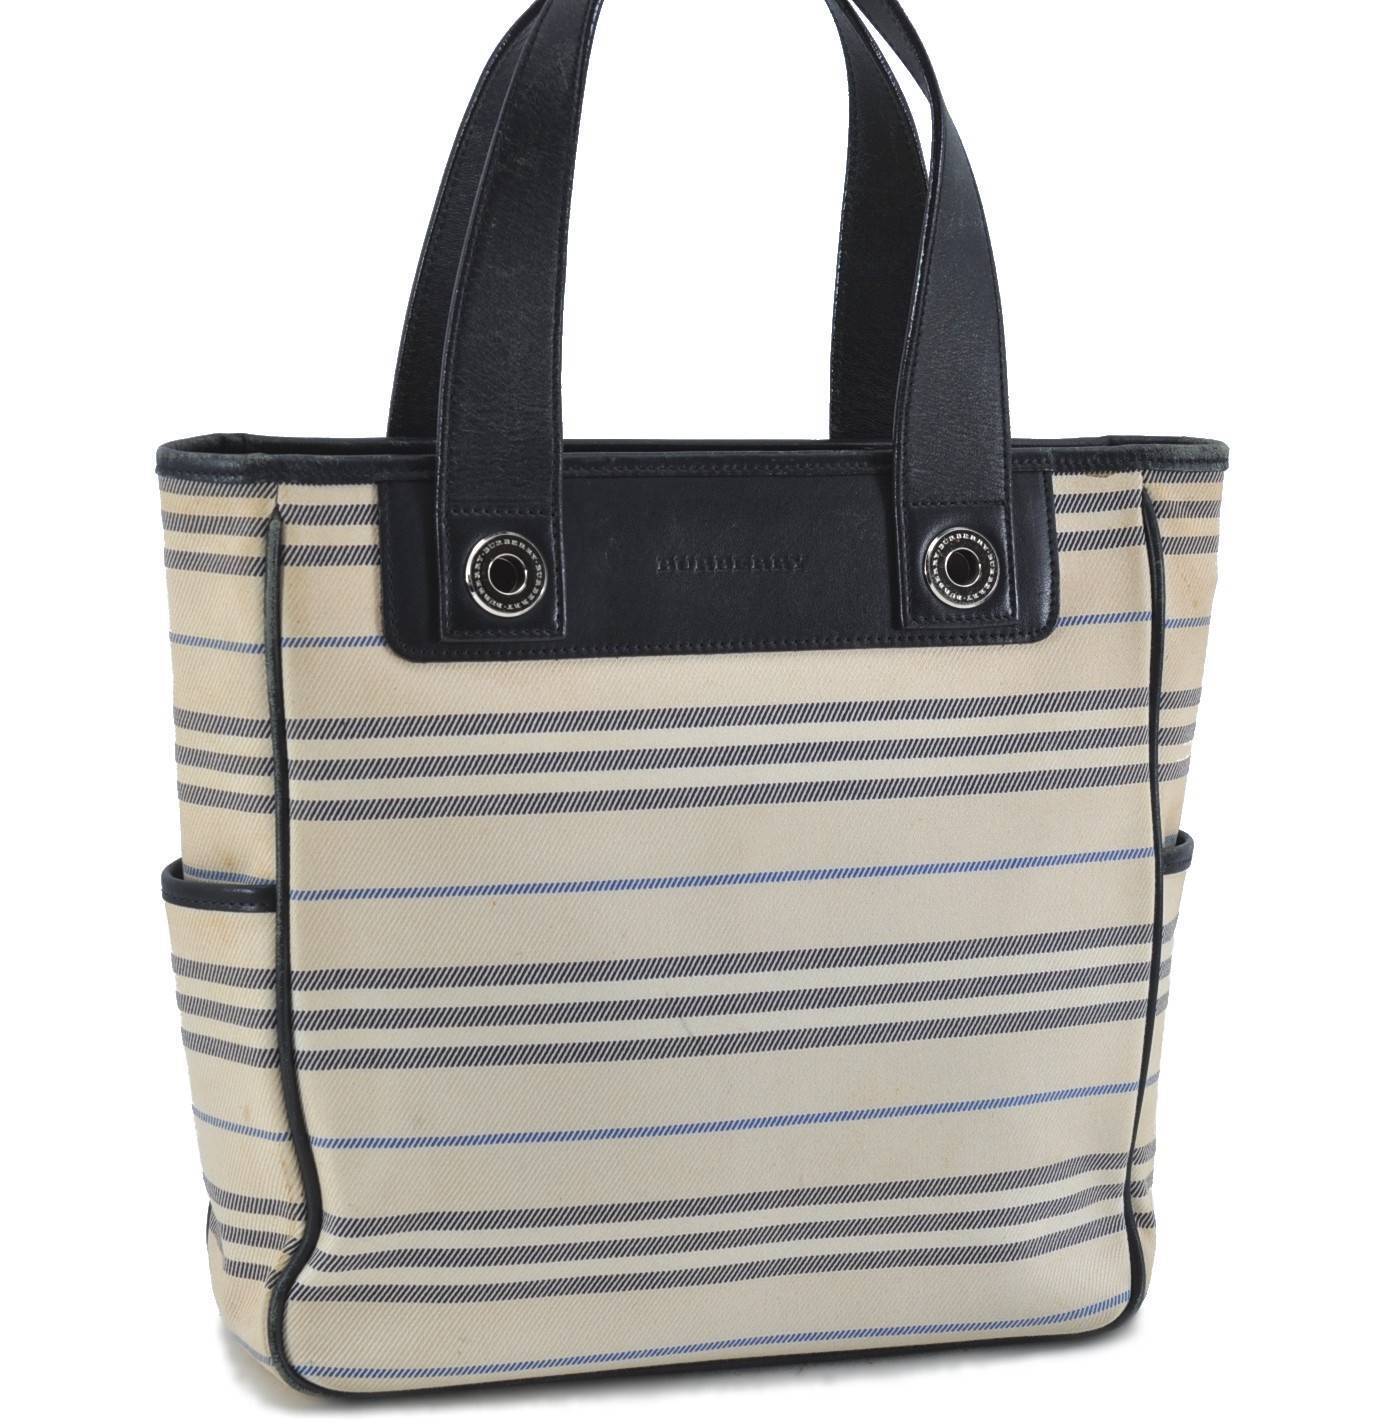 Authentic BURBERRY Stripe Tote Hand Bag Canvas Leather White Navy H3363